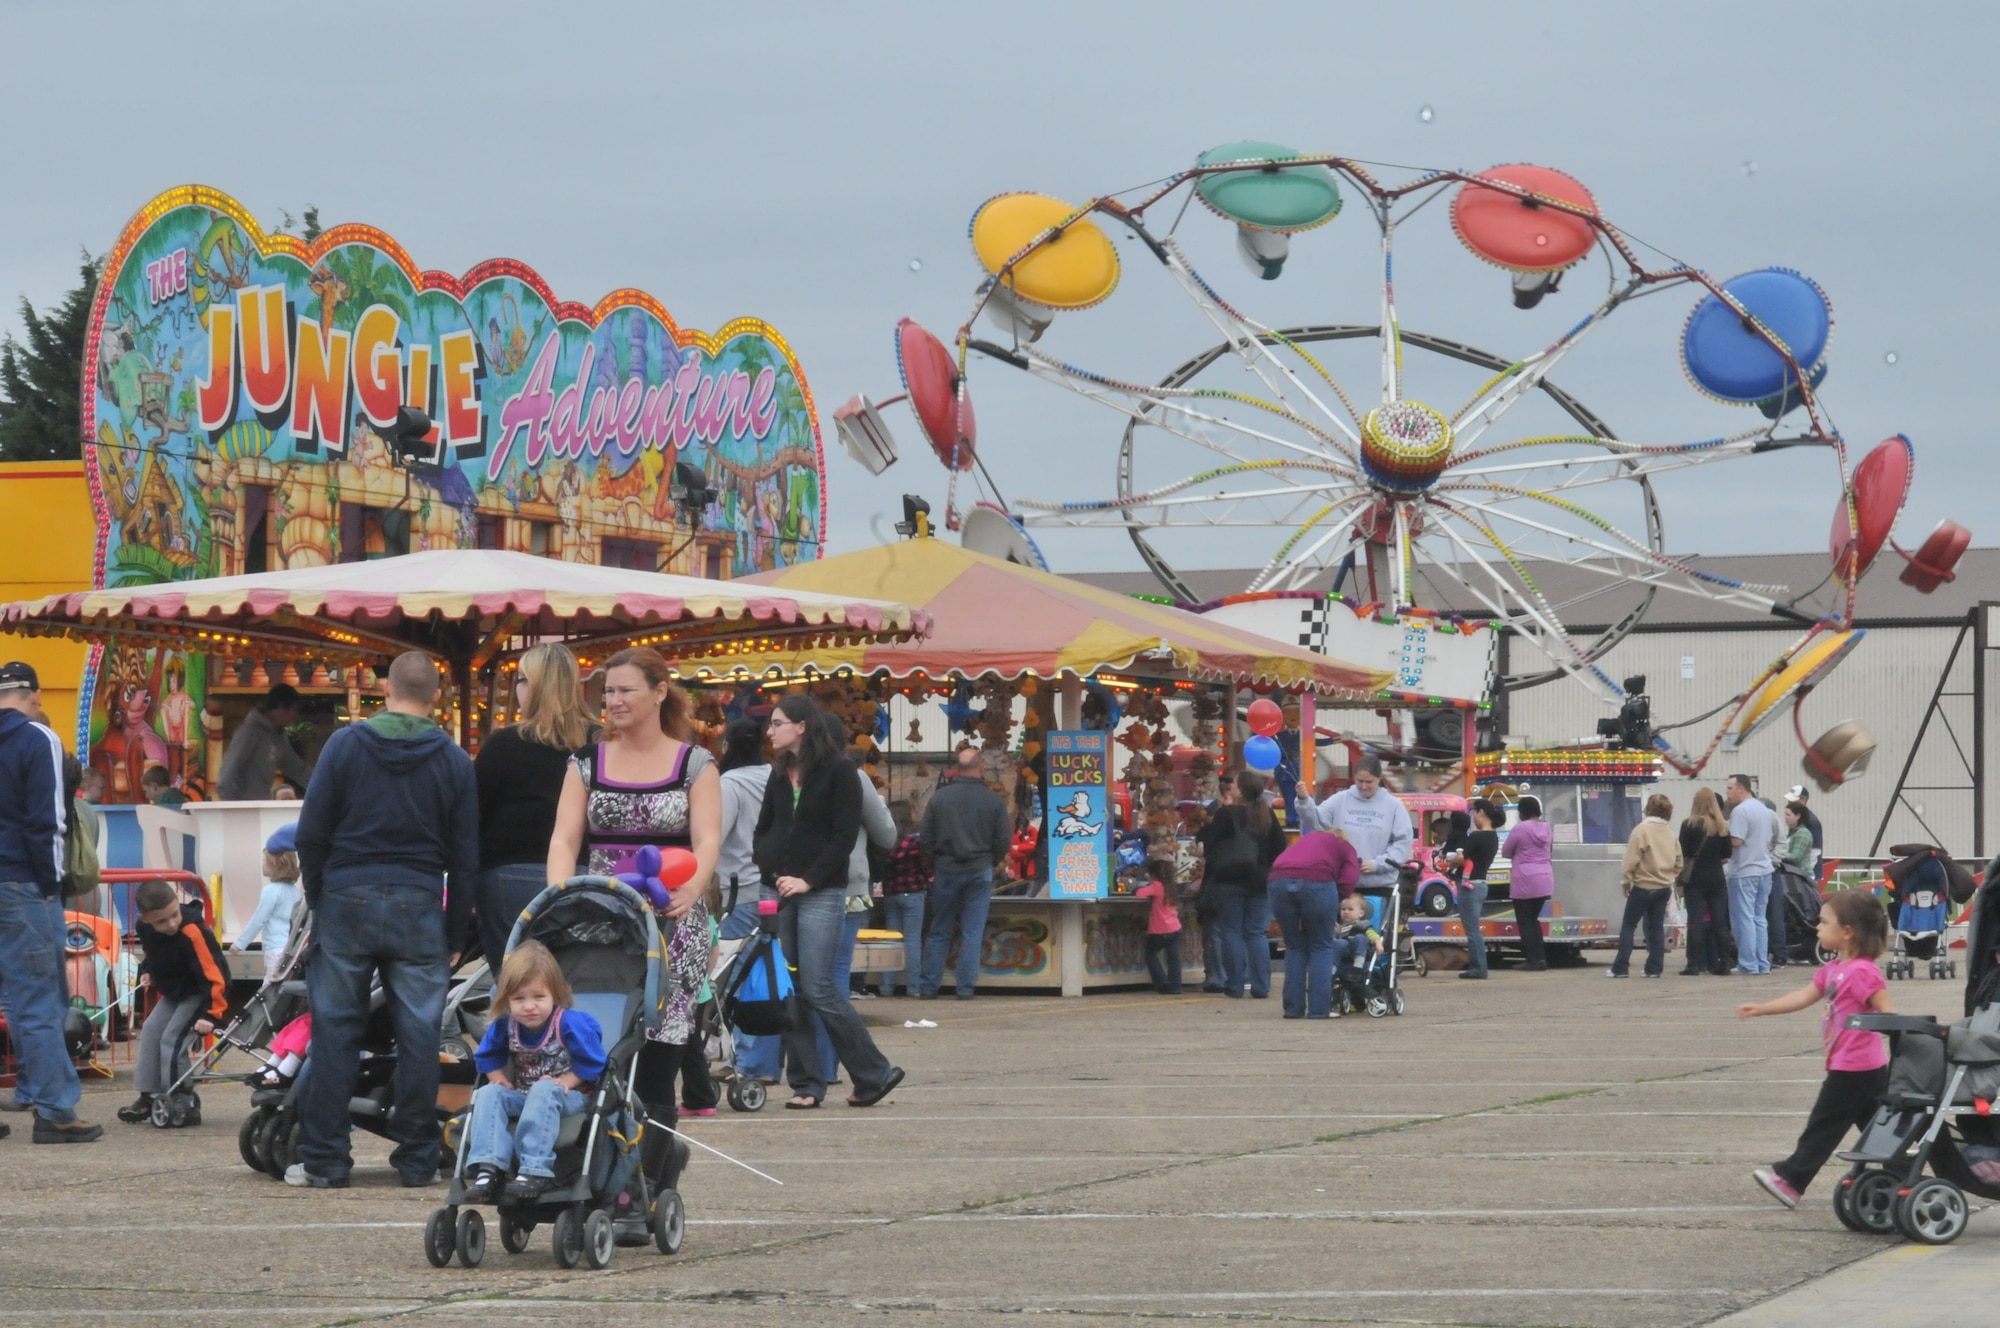 ROYAL AIR FORCE LAKENHEATH, England – Parents and children enjoy the carnival rides at the Holiday Bazaar on Oct. 2. Approximately 1,000 people came to shop the wares of more than 100 vendors from the local community. (U.S. Air Force photo/Senior Airman David Dobrydney)